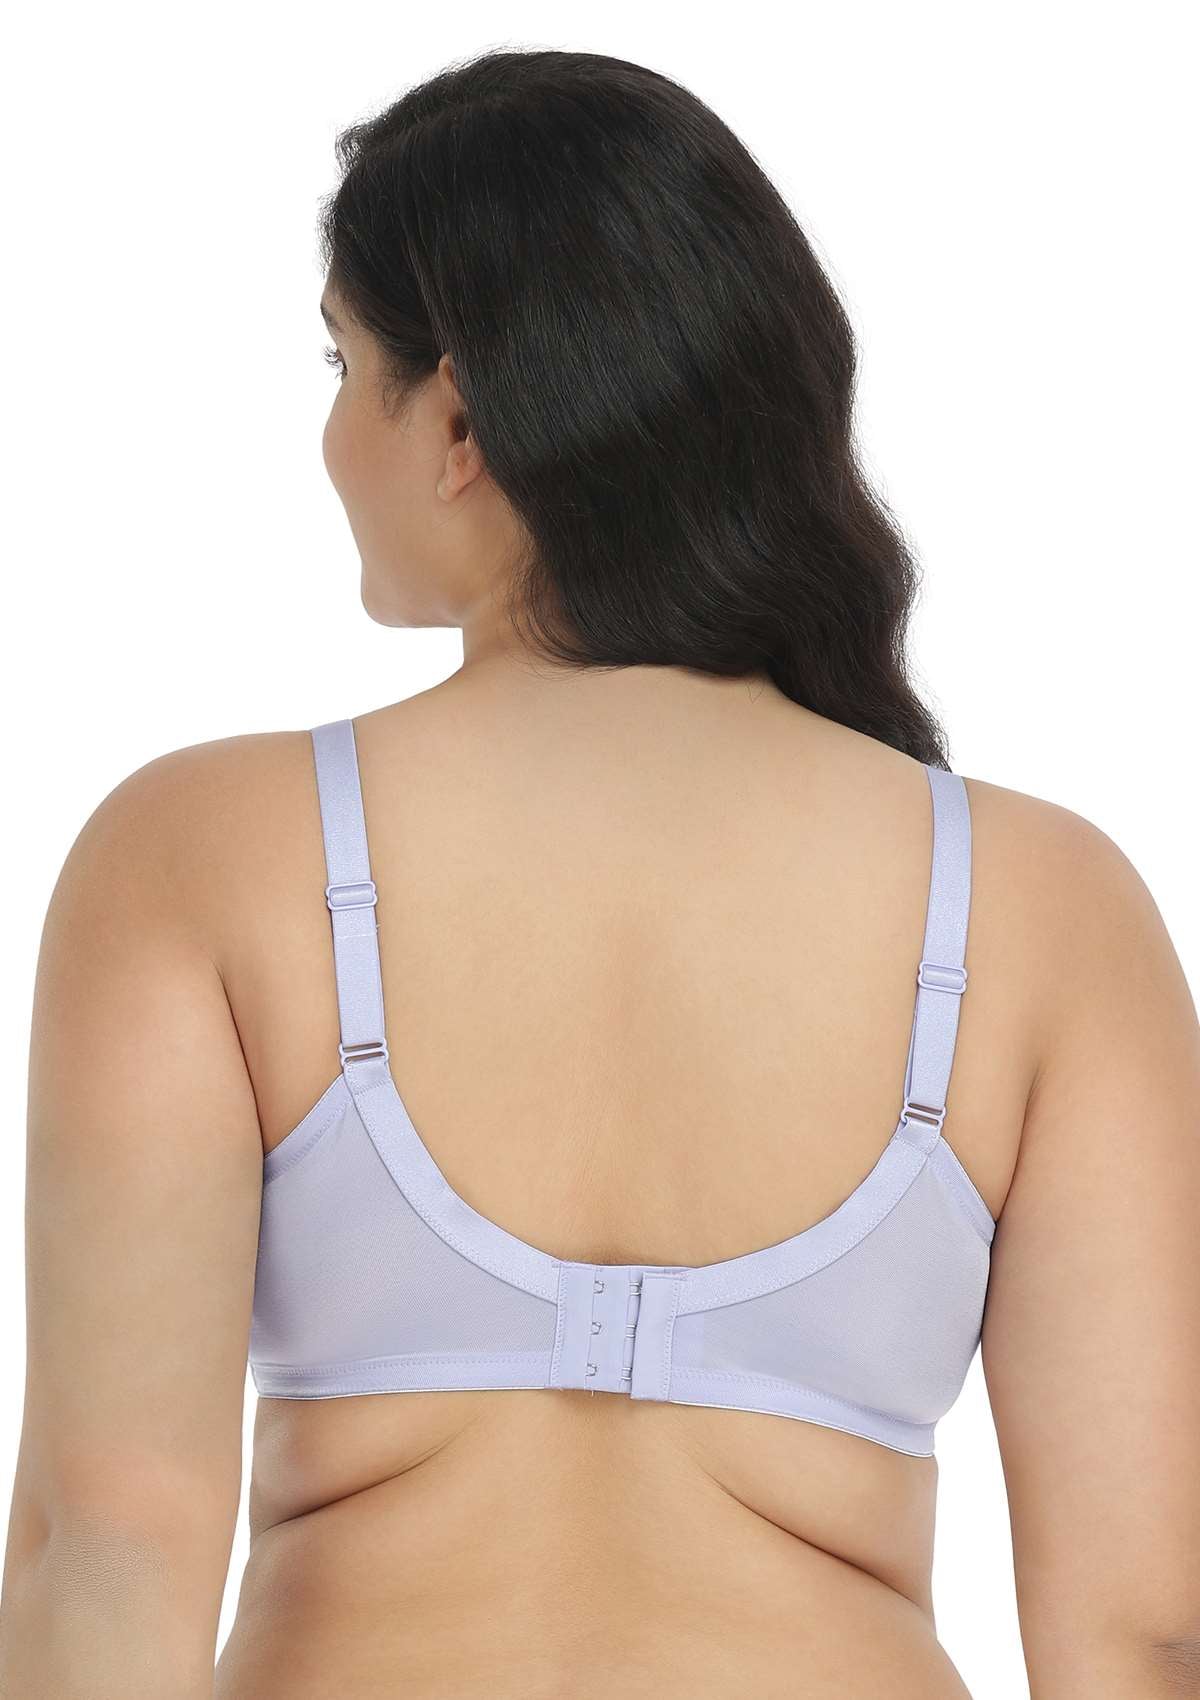 HSIA Wisteria Bra For Lift And Support - Full Coverage Minimizer Bra - Crystal Blue / 38 / D